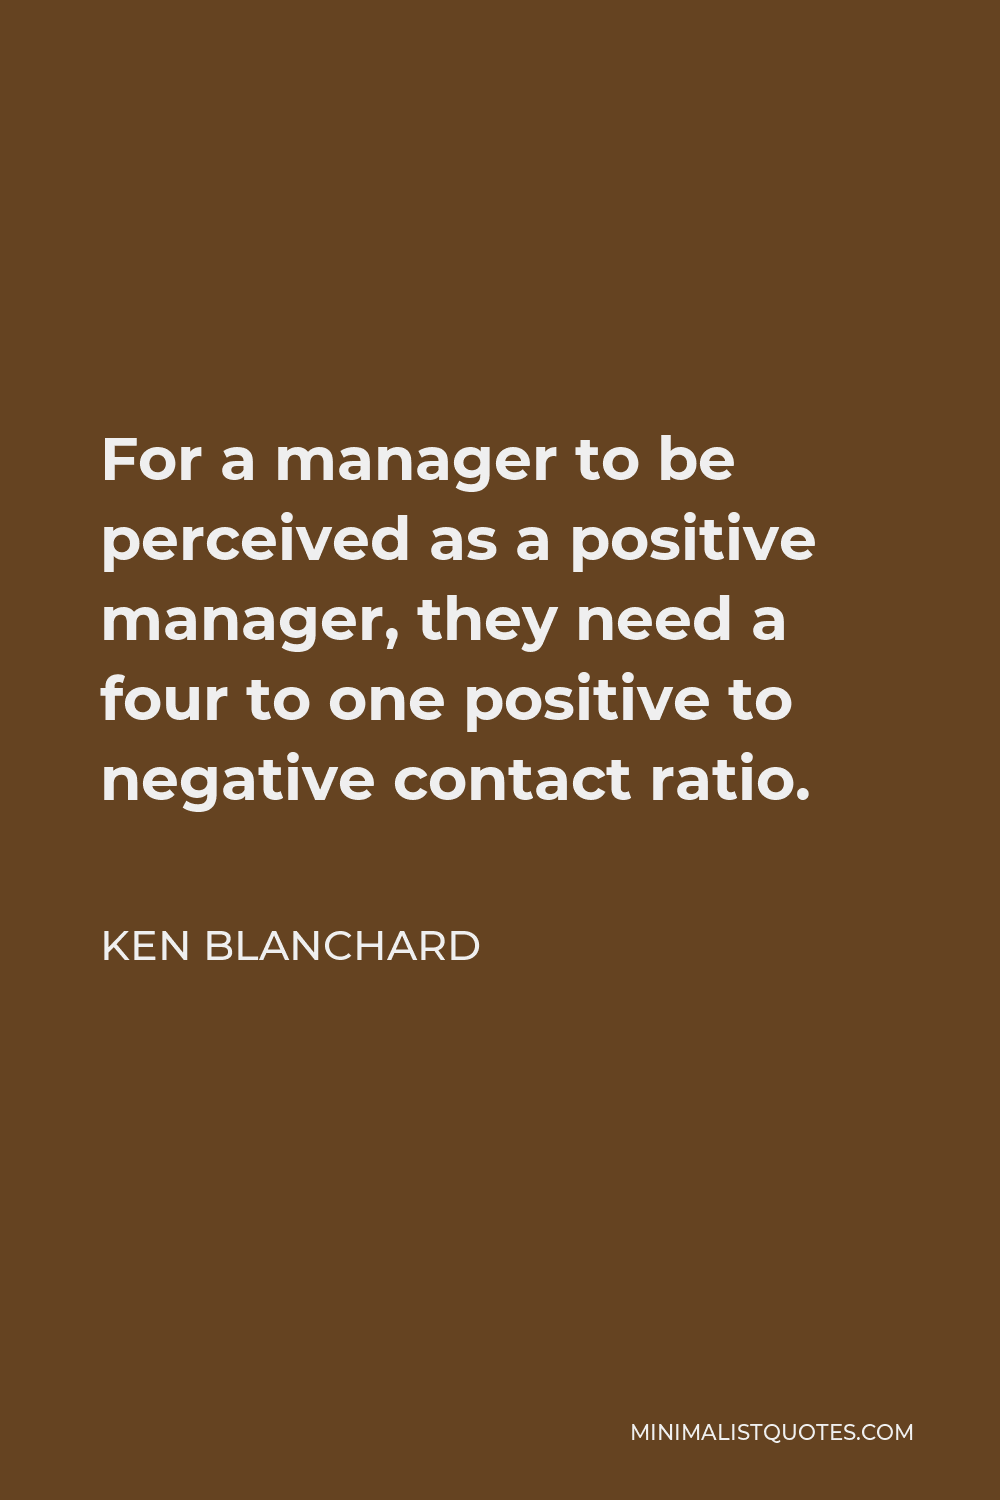 Ken Blanchard Quote - For a manager to be perceived as a positive manager, they need a four to one positive to negative contact ratio.